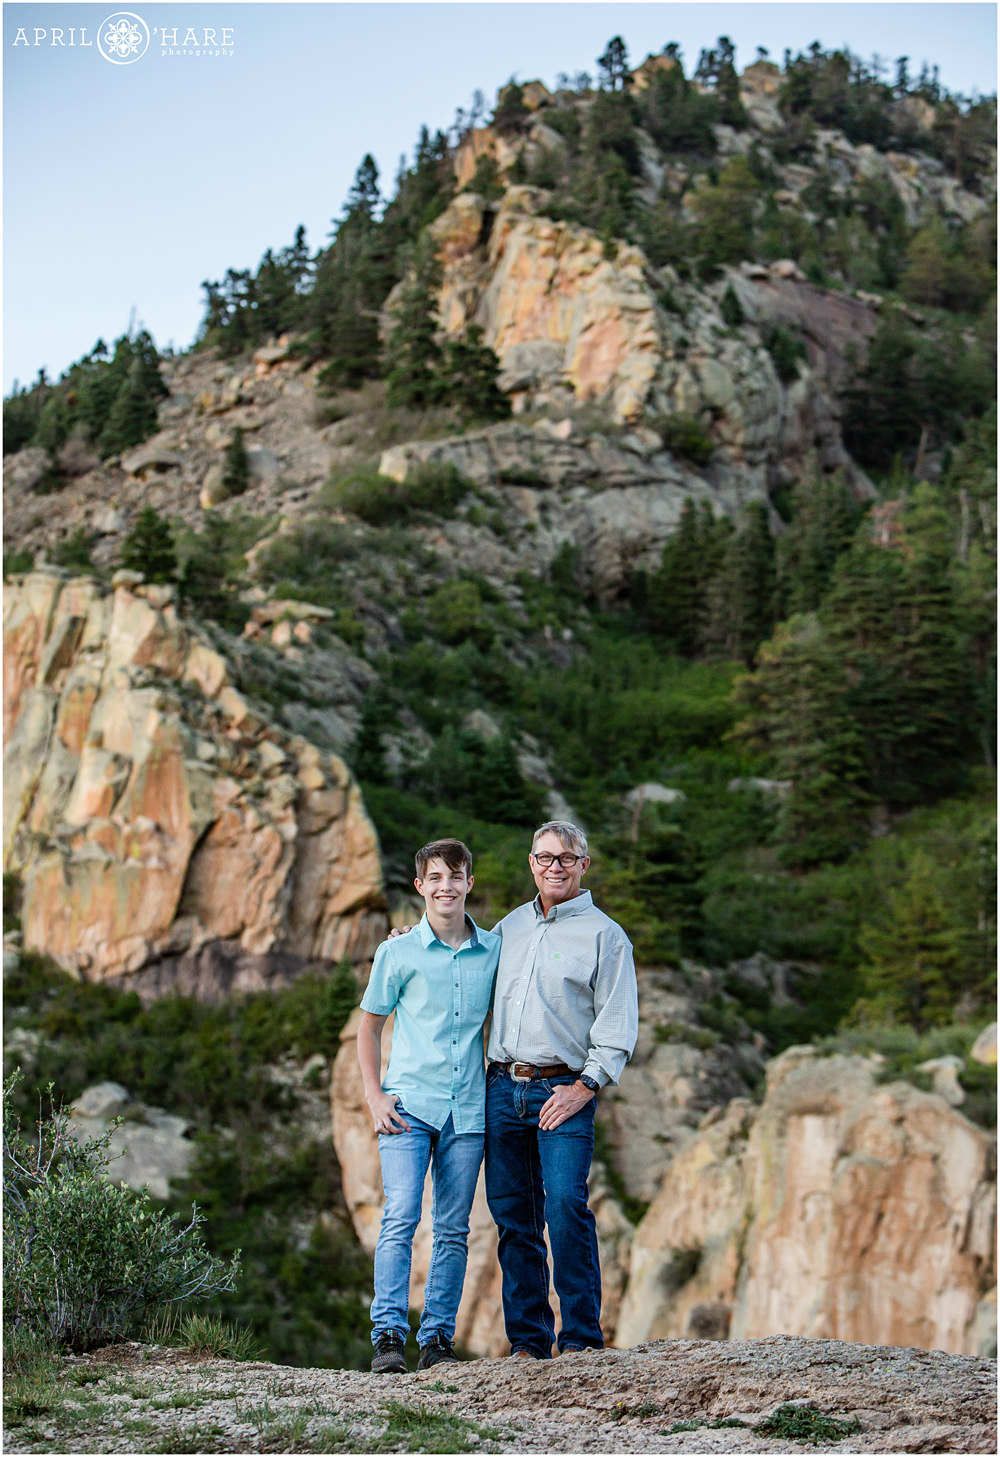 A dad poses with his son with a beautiful rocky cliff backdrop at Lovers Leap in Southern Colorado